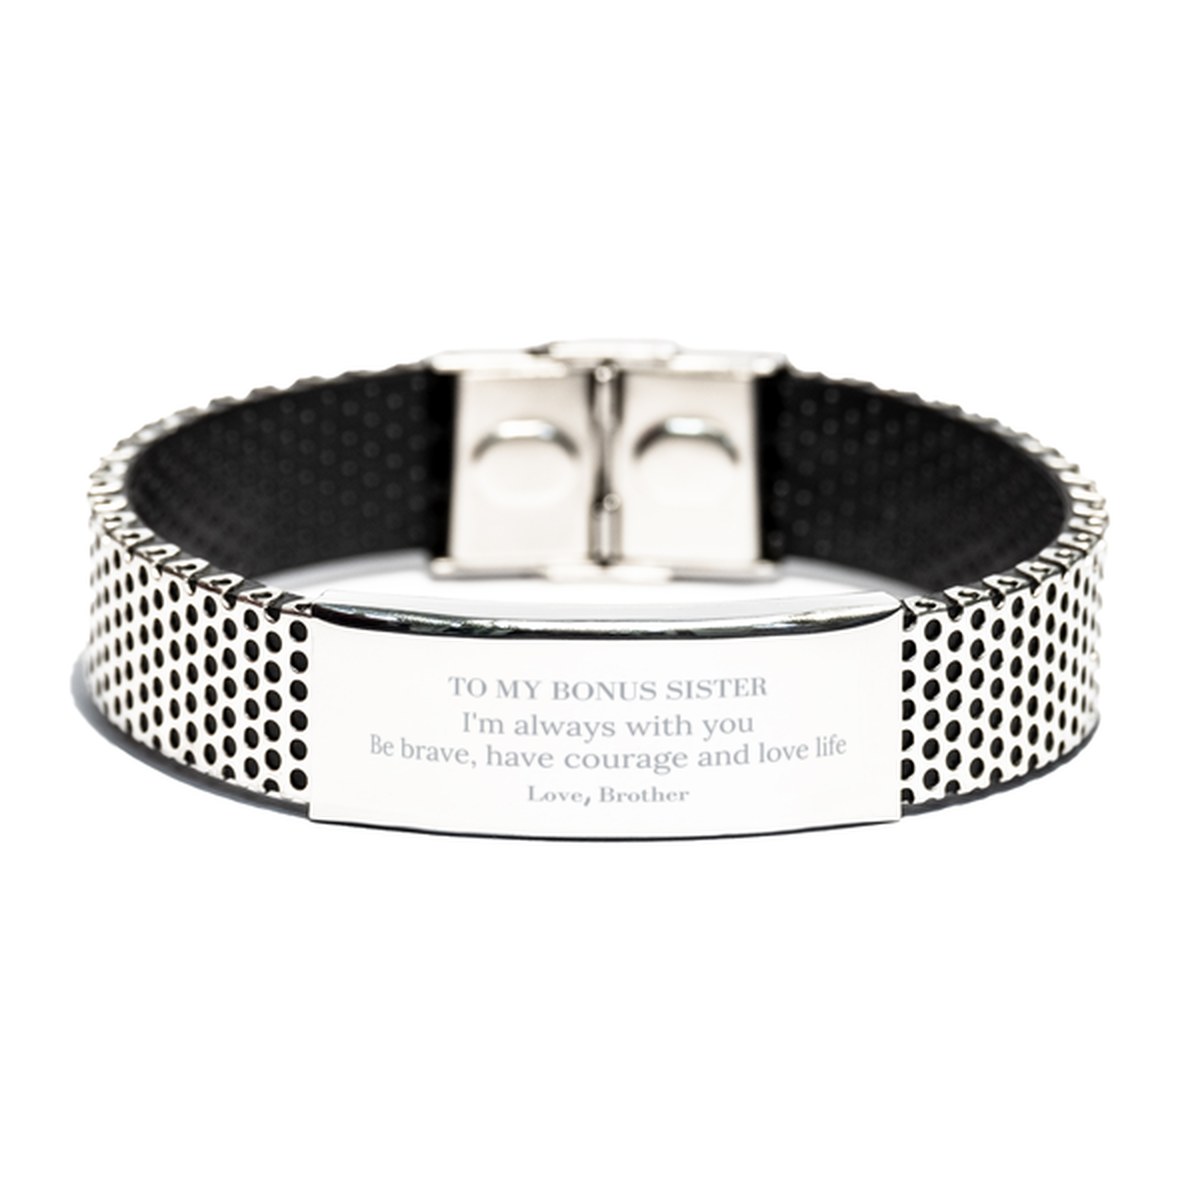 To My Bonus Sister Gifts from Brother, Unique Stainless Steel Bracelet Inspirational Christmas Birthday Graduation Gifts for Bonus Sister I'm always with you. Be brave, have courage and love life. Love, Brother